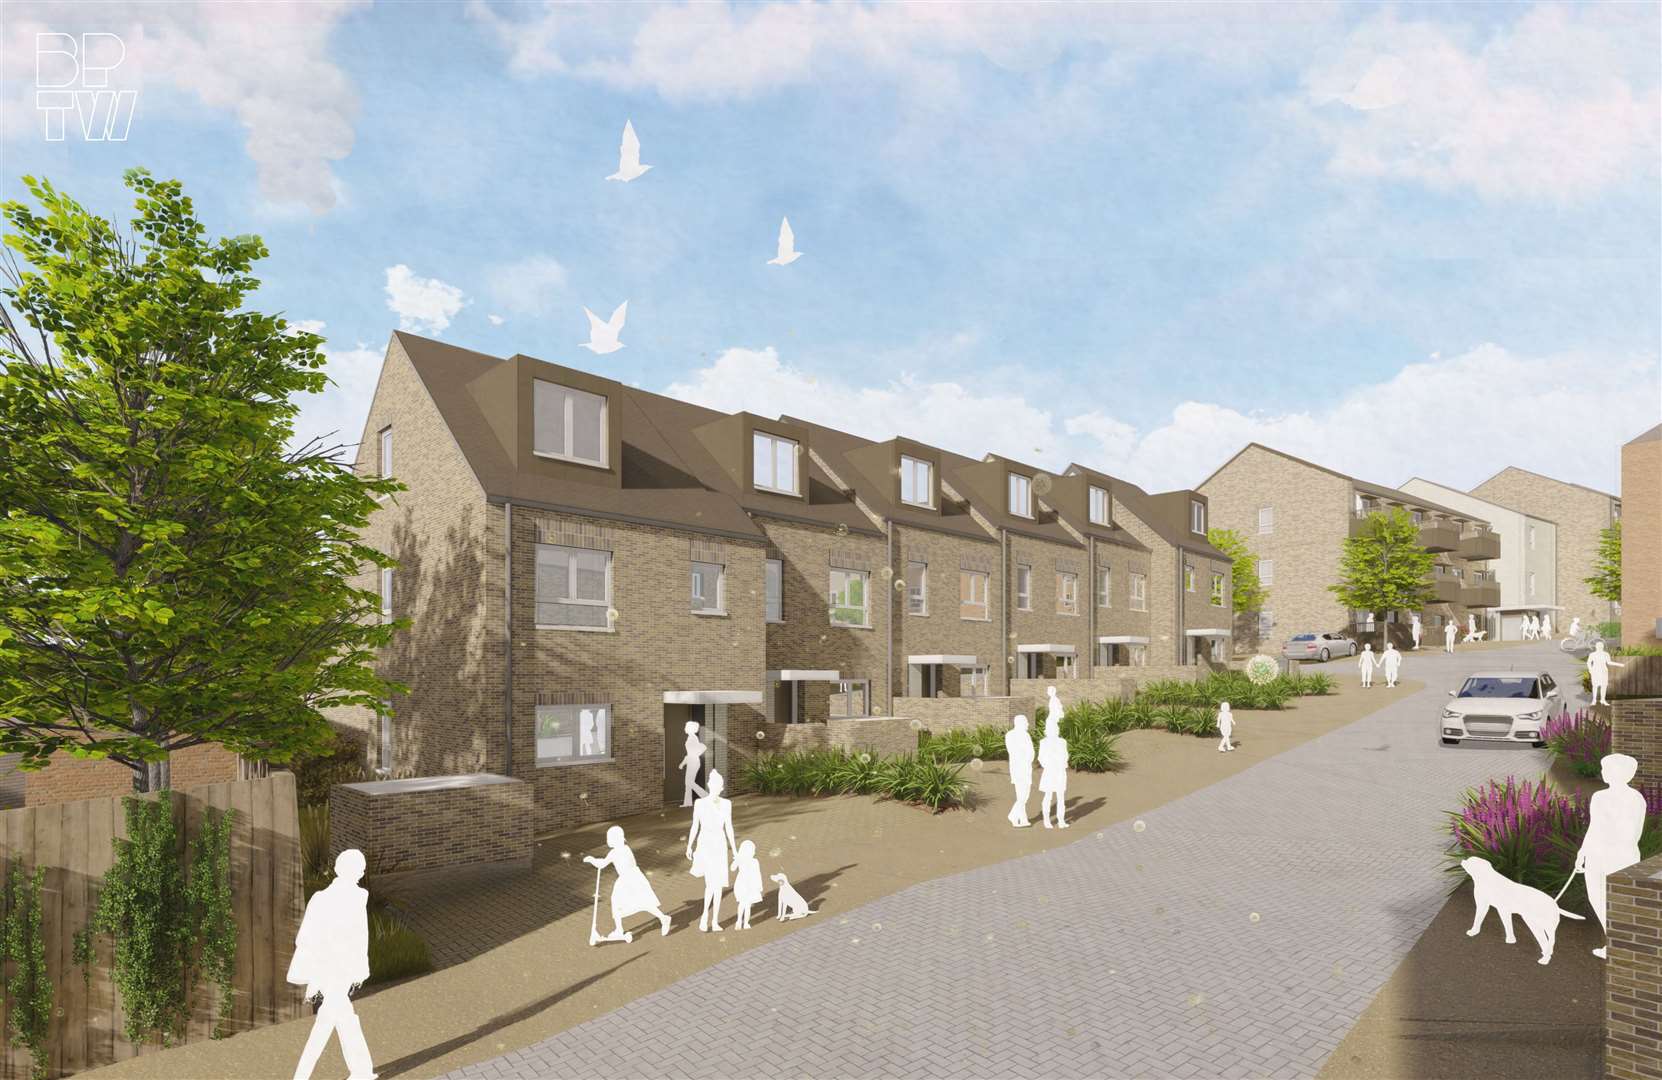 The plans have been approved by councillors at planning committee. Picture: BPTW